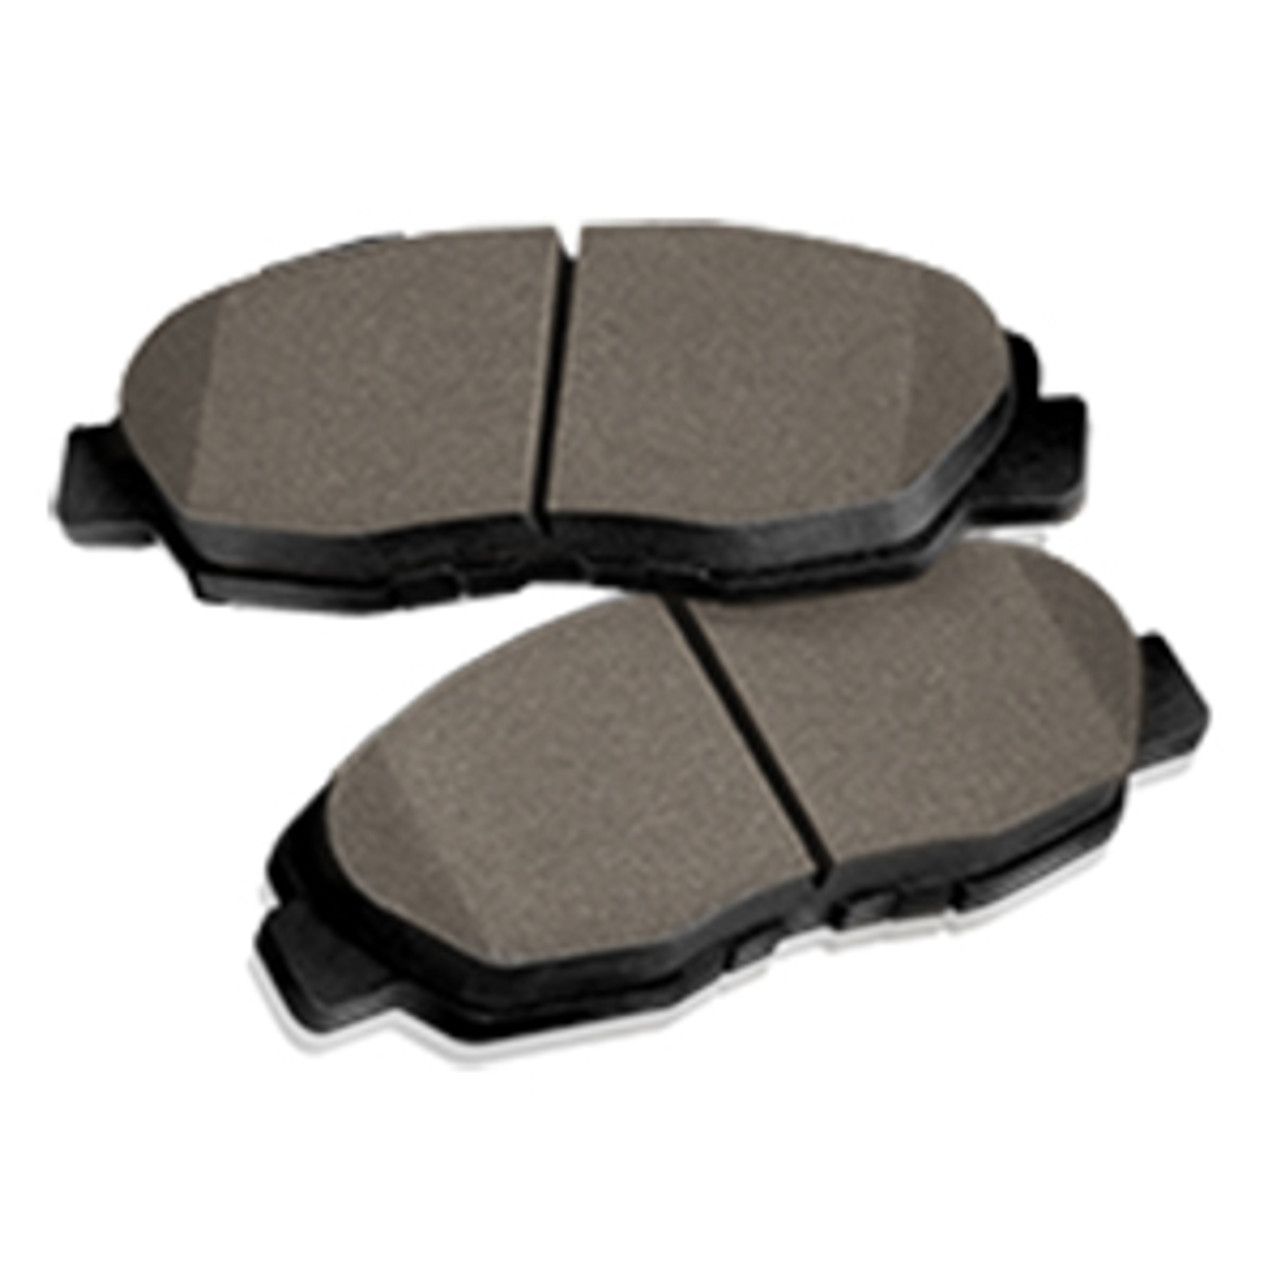 2.01.2159 BRAKE SHOES FOR REAR DISC BRAKE ASSEMBLY, D3

On your purchase from Evolution Electric Vehicle, Evolution is your source for most extensive selection of golf cart parts and accessories in the industry.

Apply to (Vehicle Type）：

D3/D3 LIFTED